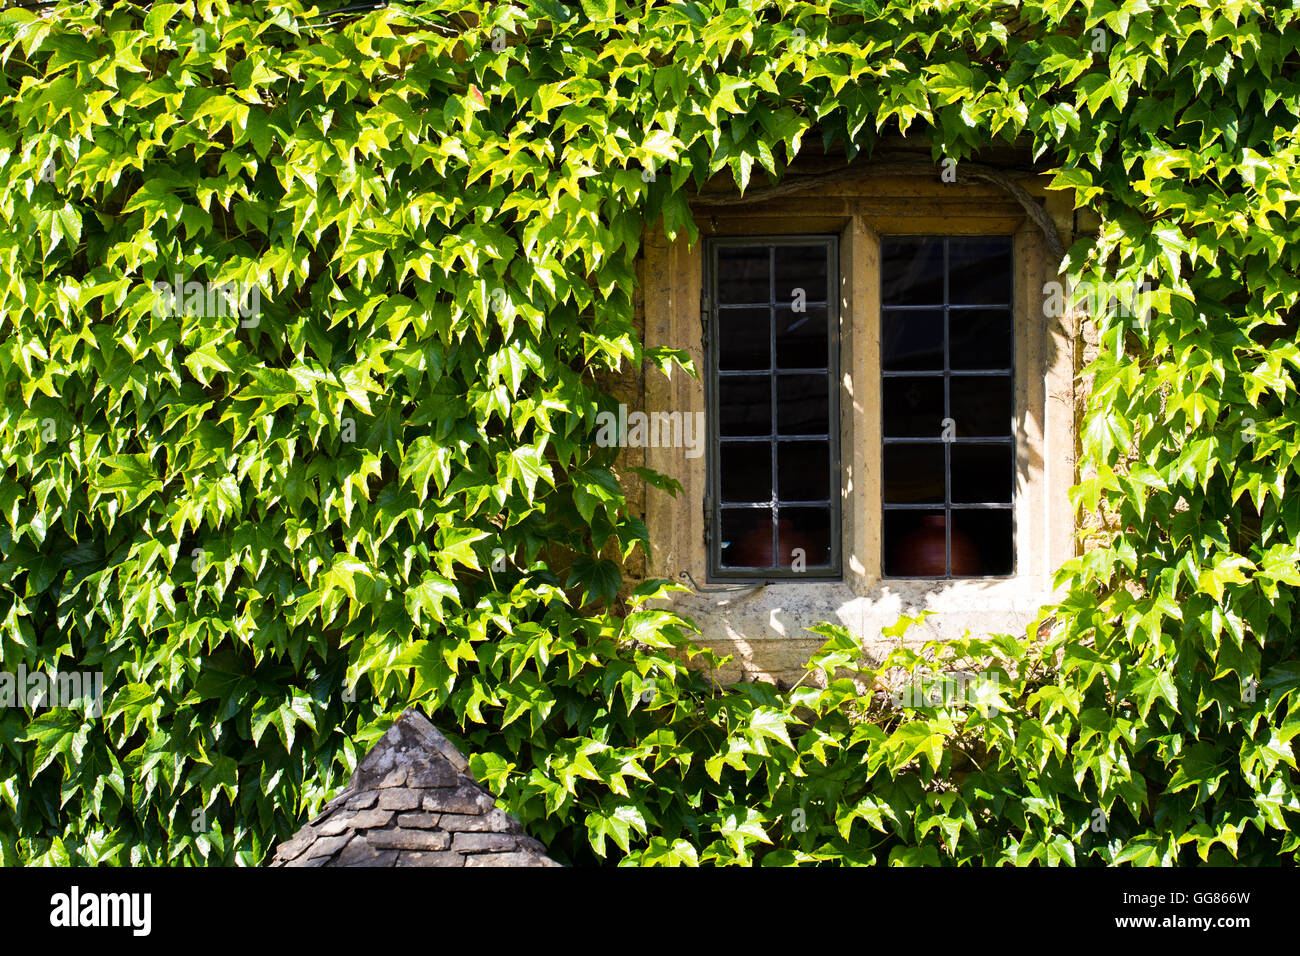 A window and wall of an old stone house surrounded and covered in the green leaves of a creeping or climbing ivy plant. Stock Photo